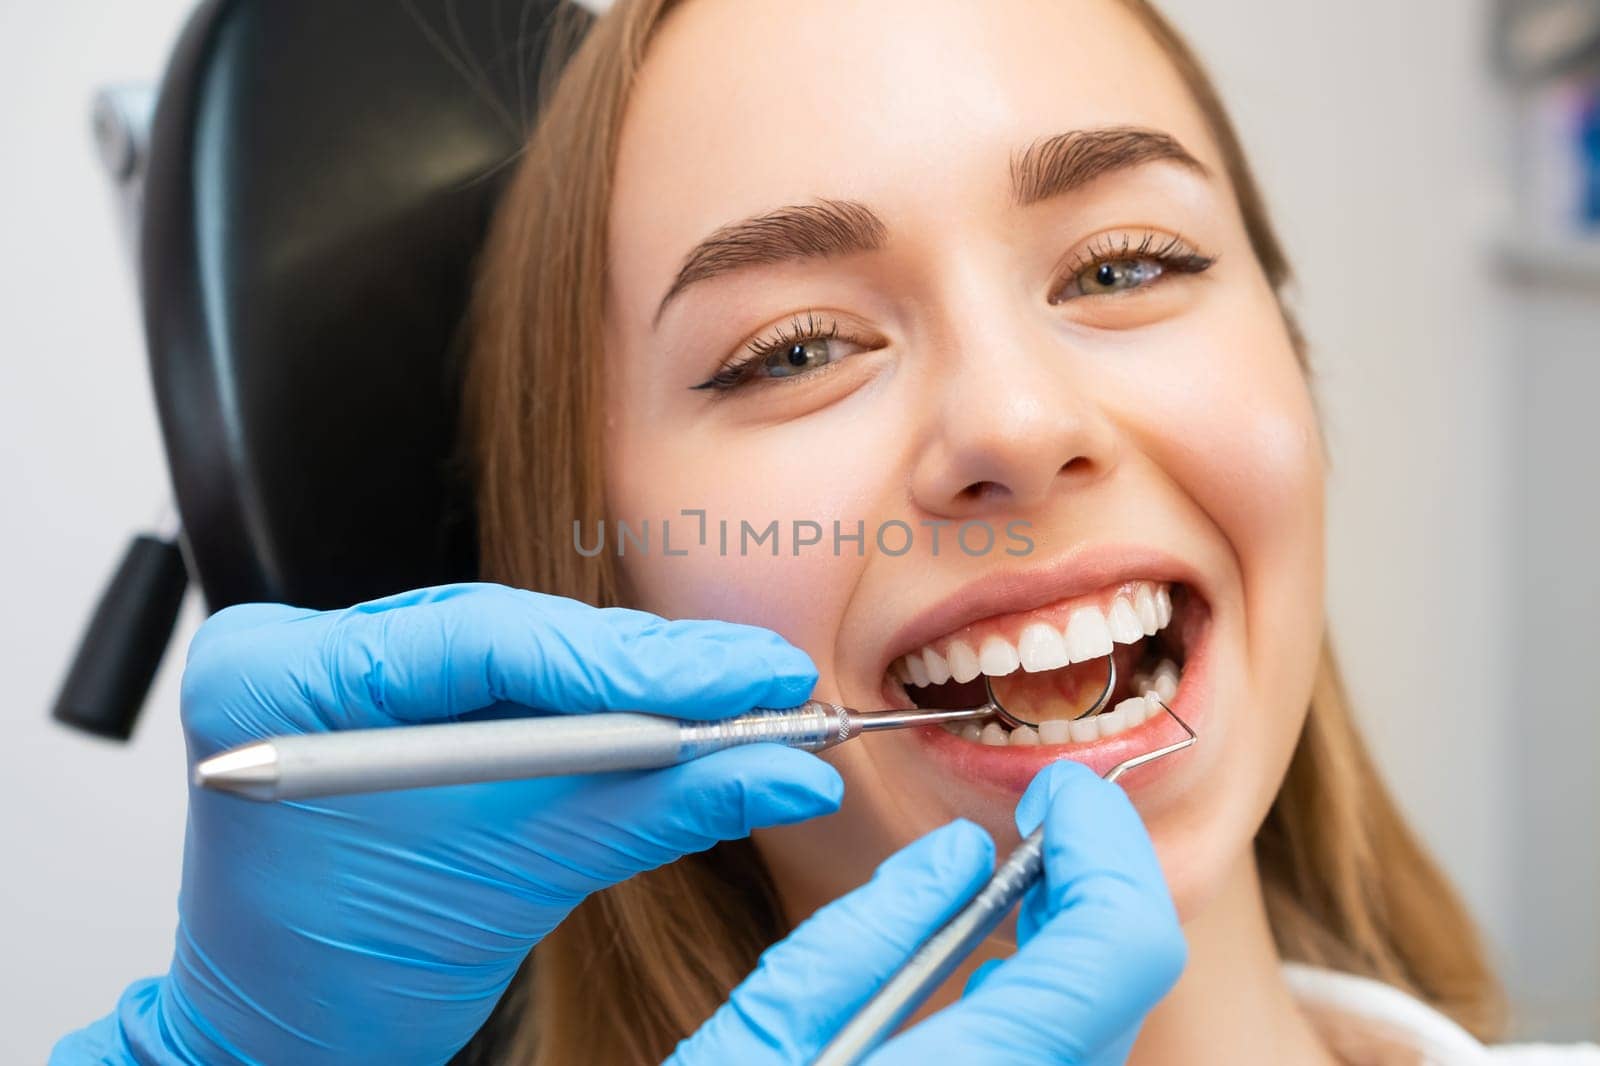 Female patient sitting in chair during dental treatment at dentist office. Doctor checks front teeth using instruments to check teeth strength